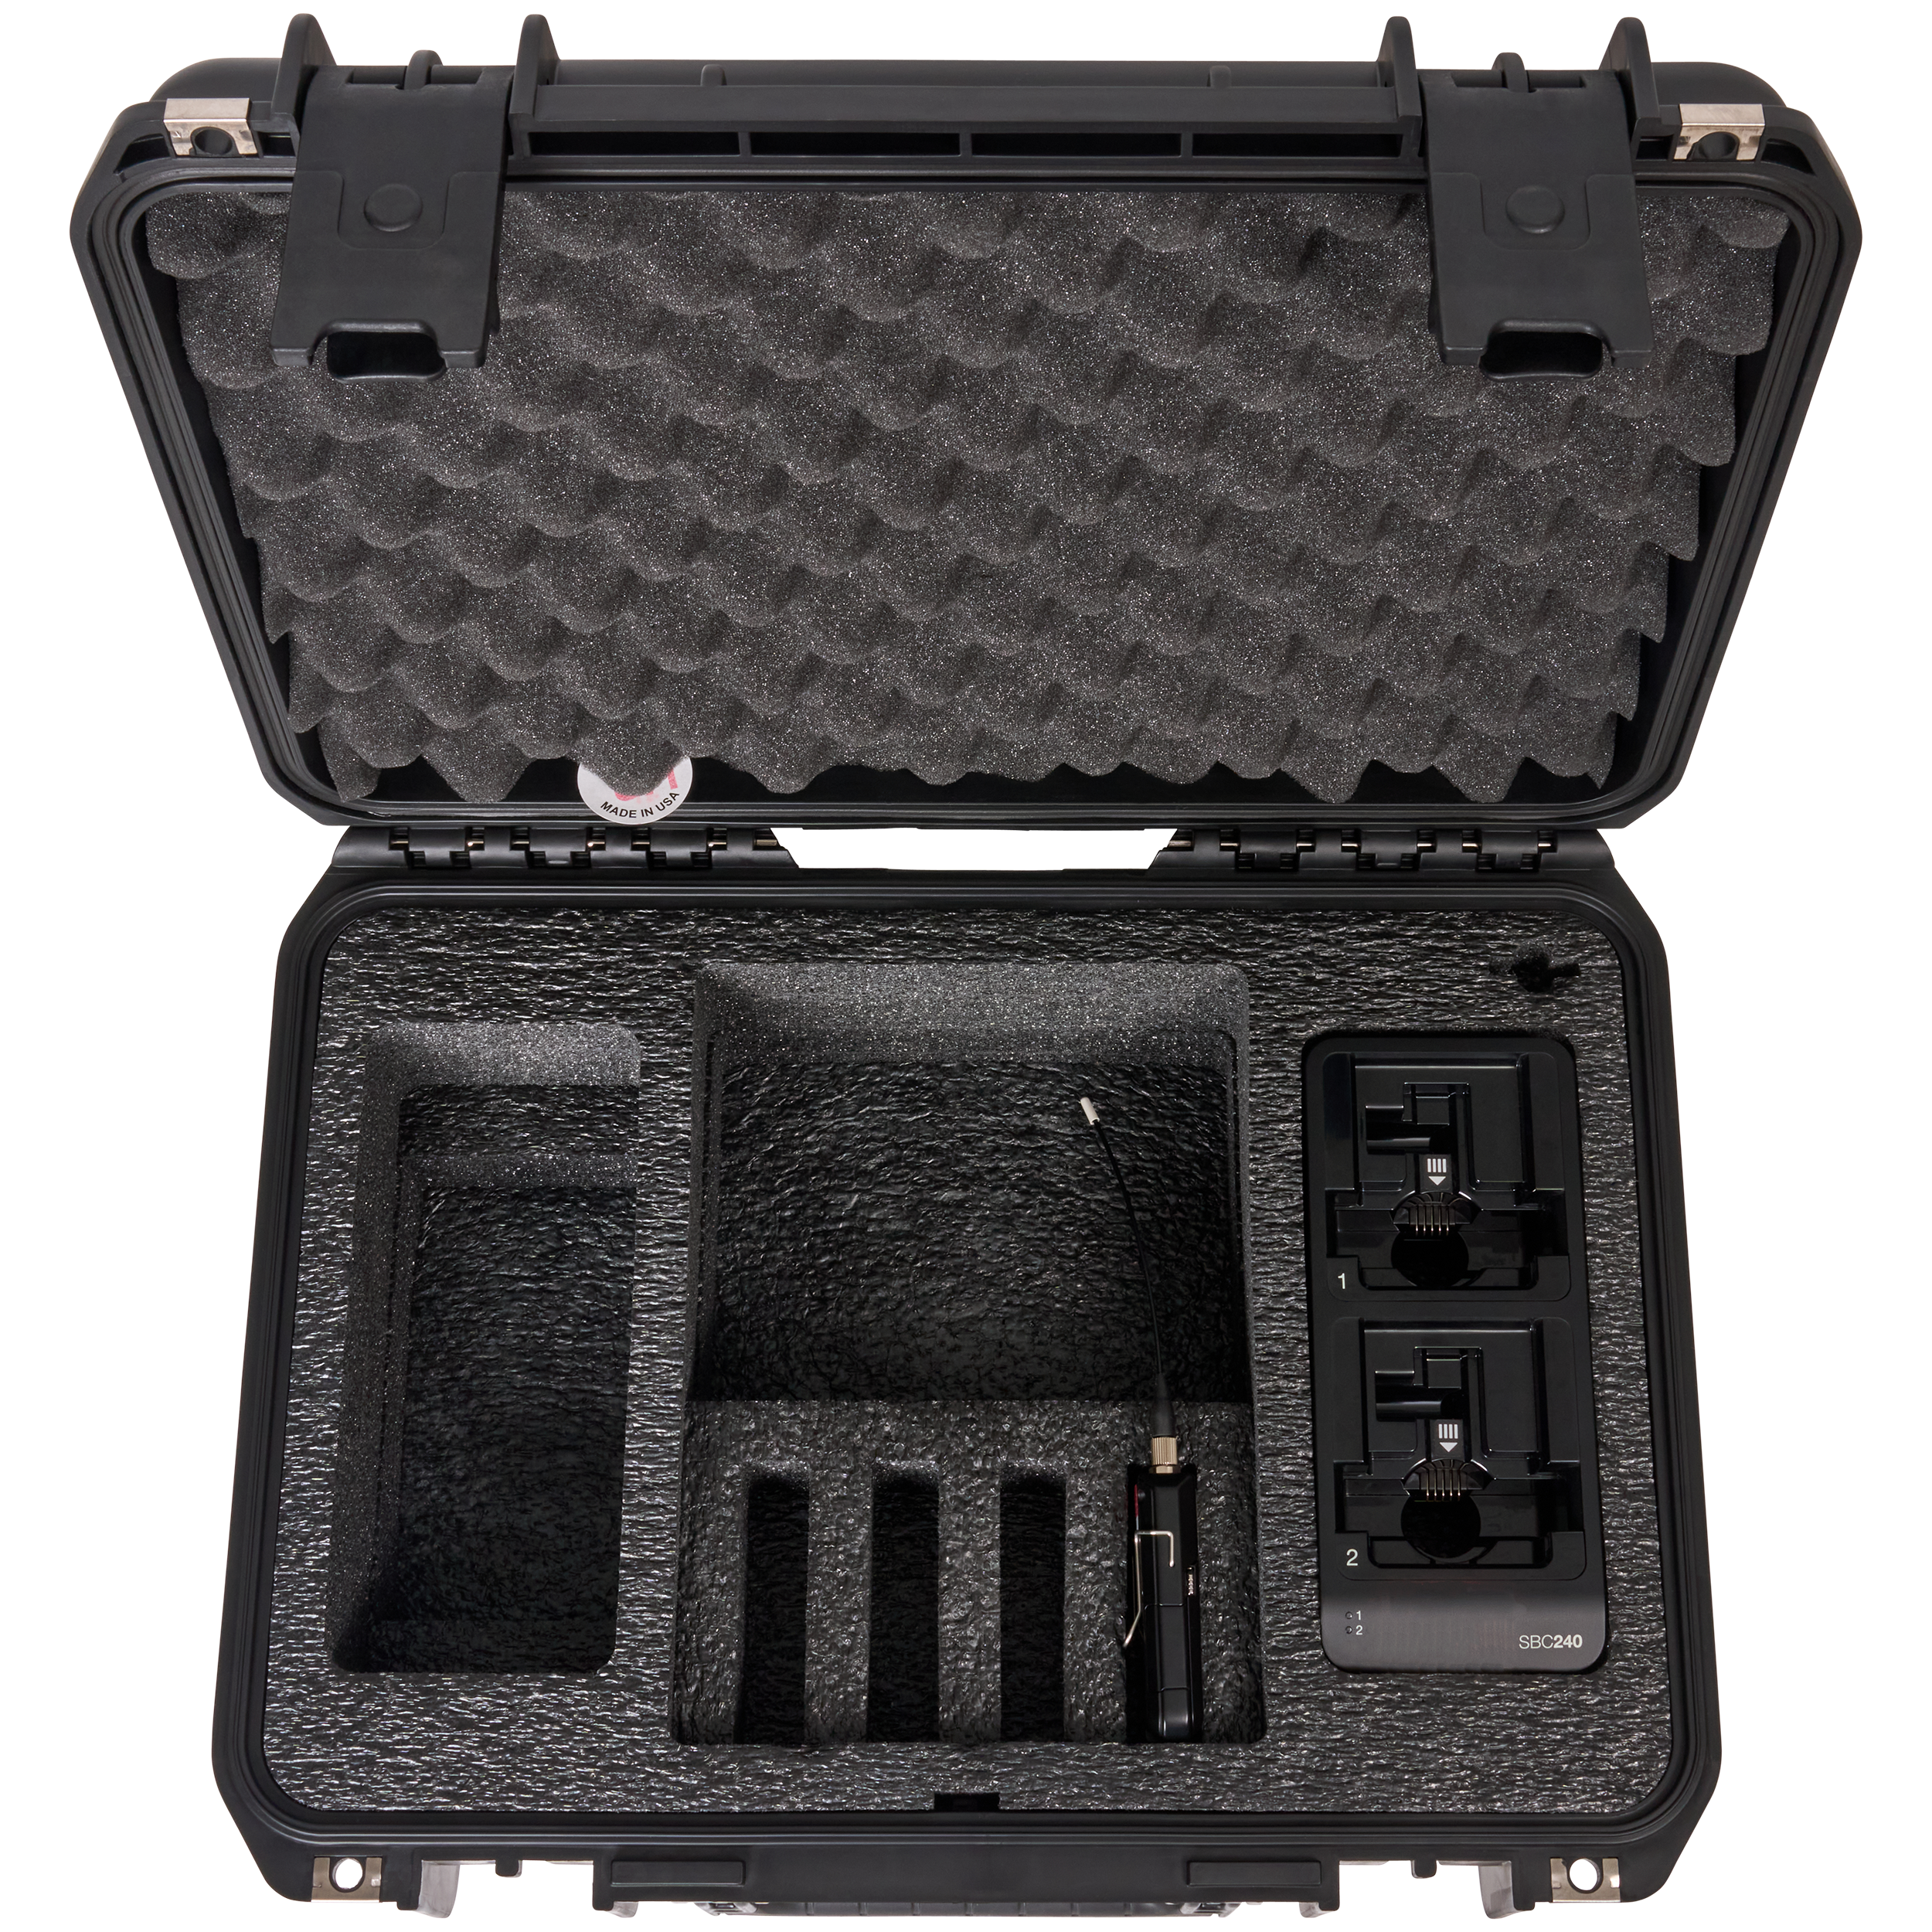 BYFP ipCase for 4x Shure Axient Digital Body Pack